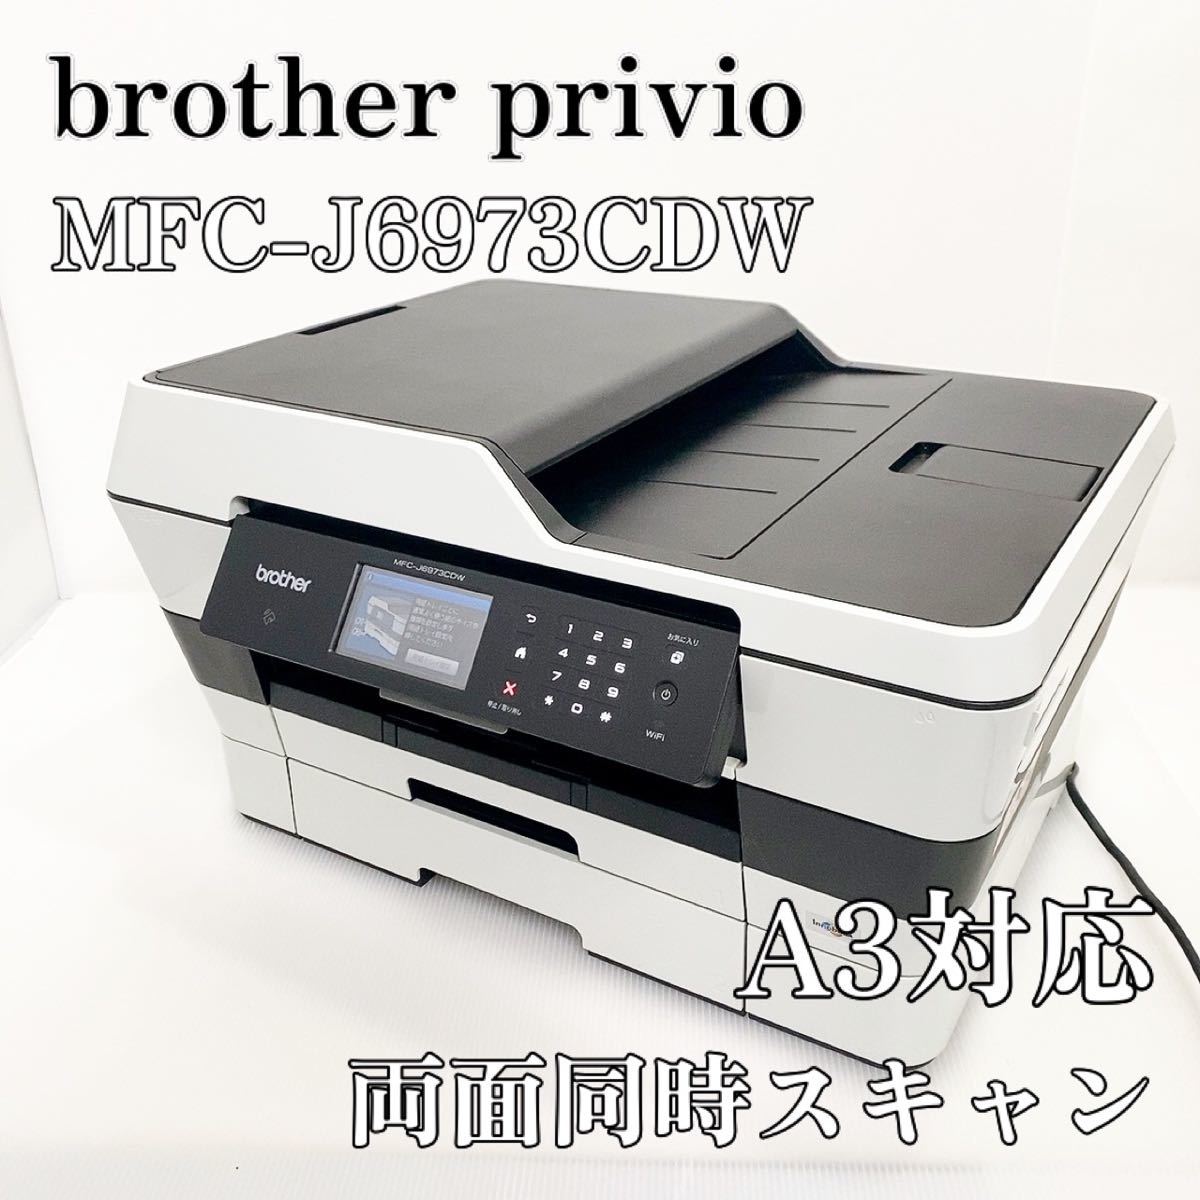 brother プリンター 本体 MFC-J6973CDW (K13 03a) PC/タブレット PC